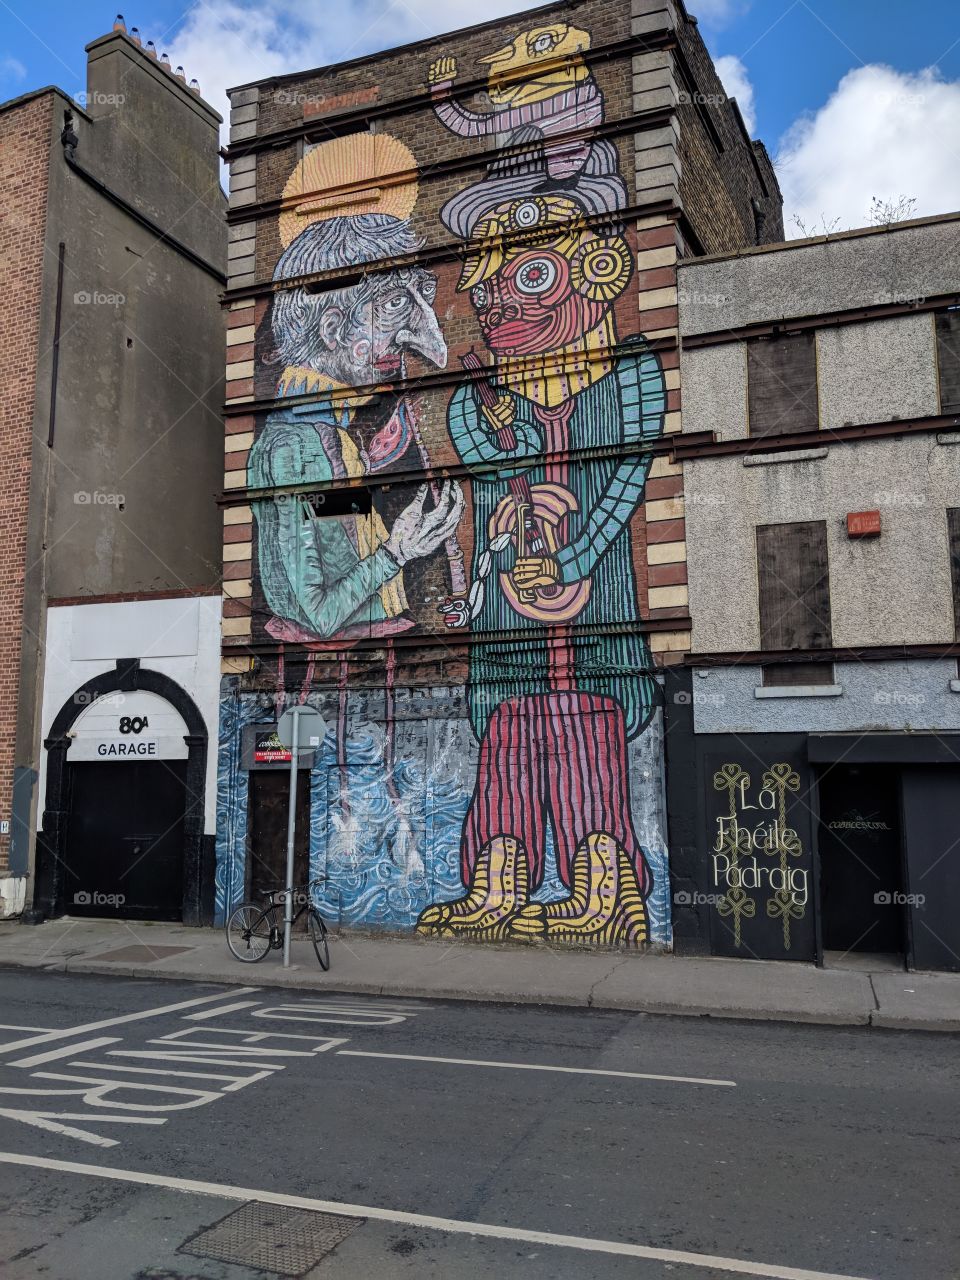 Artwork in the streets of Dublin